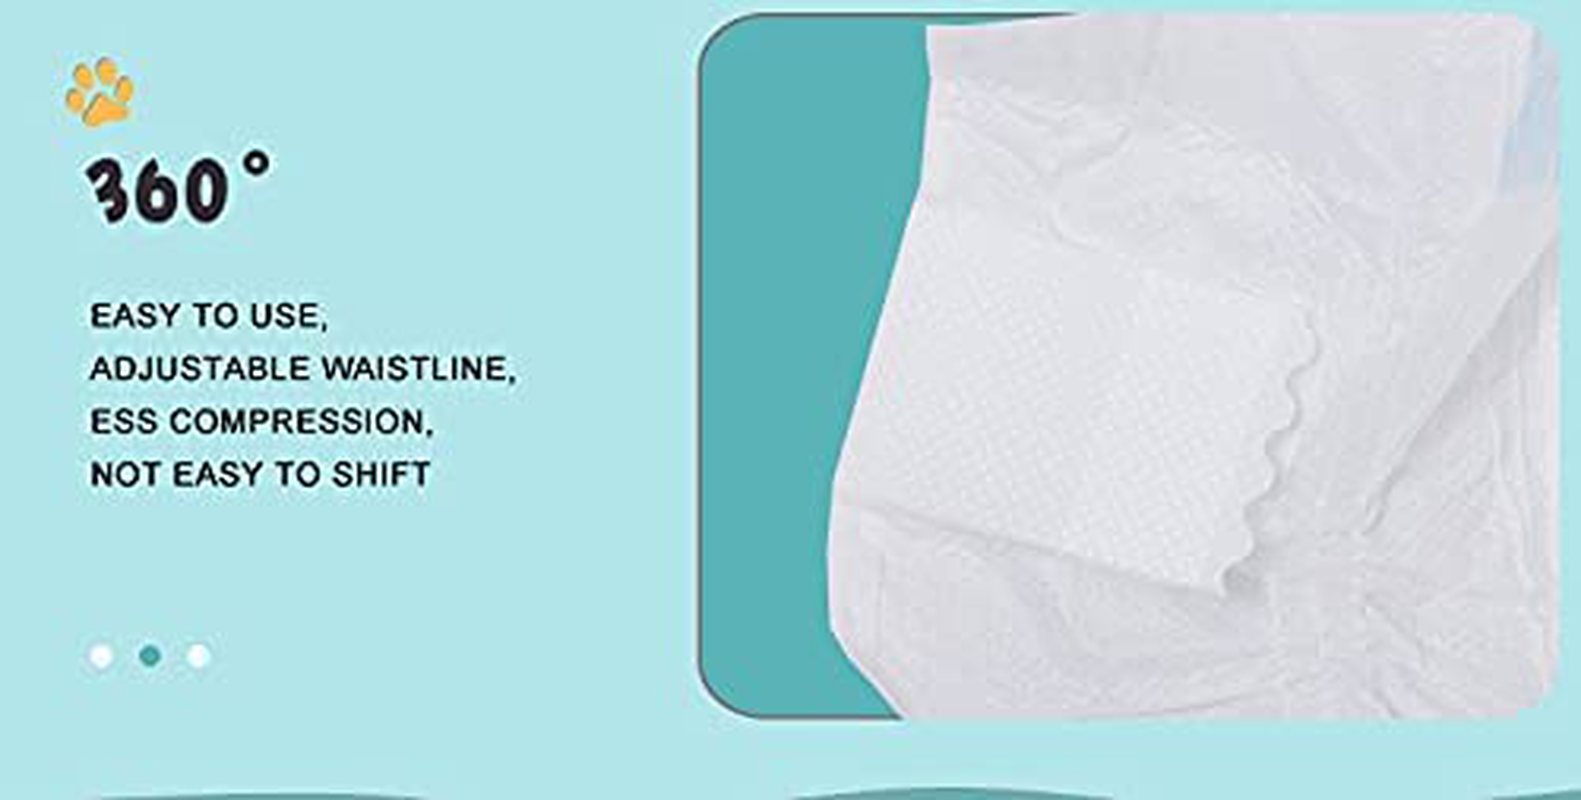 EBLSE Dog Diaper Liners Booster Pads for Male and Female Dogs, Disposable Dog Diaper Inserts Fit Most Types of Dog Diapers - Excitable Urination, Incontinence, or Washable Period Panties